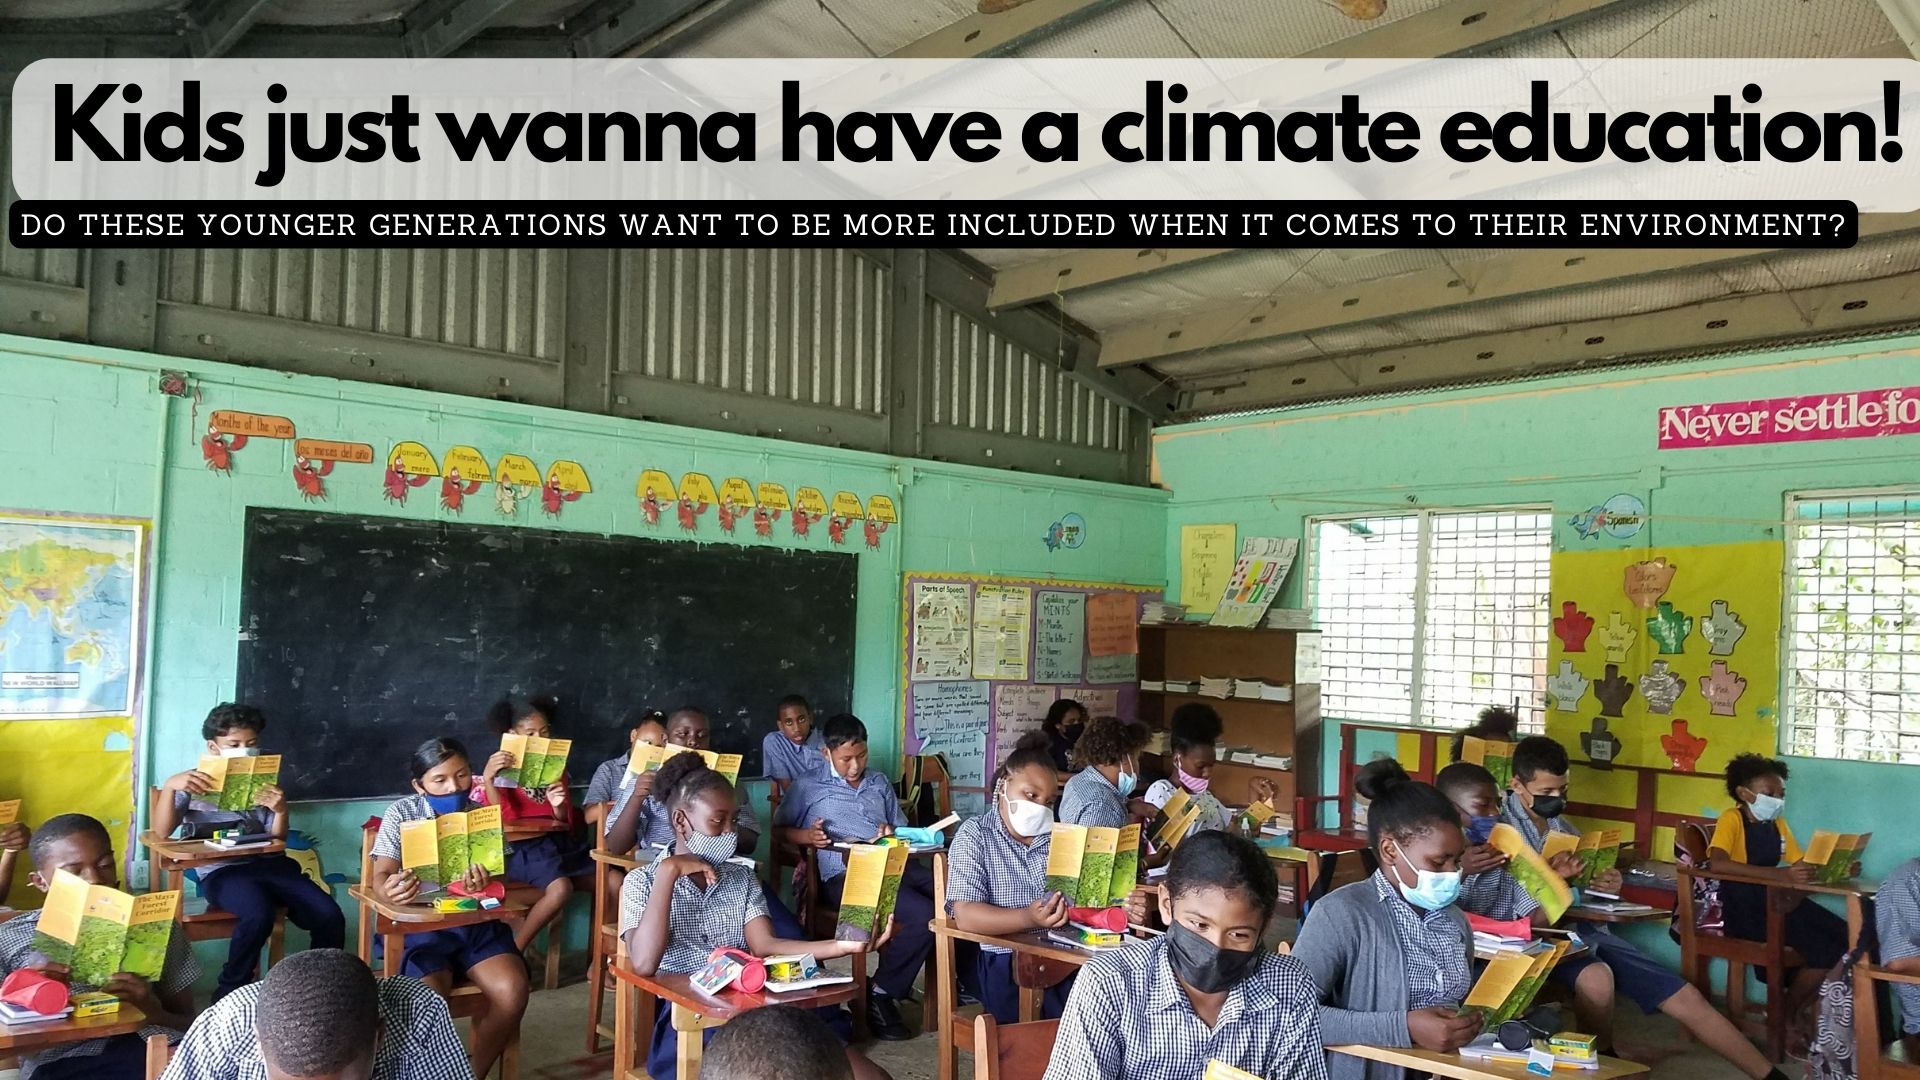 Kids just wanna have a climate education!